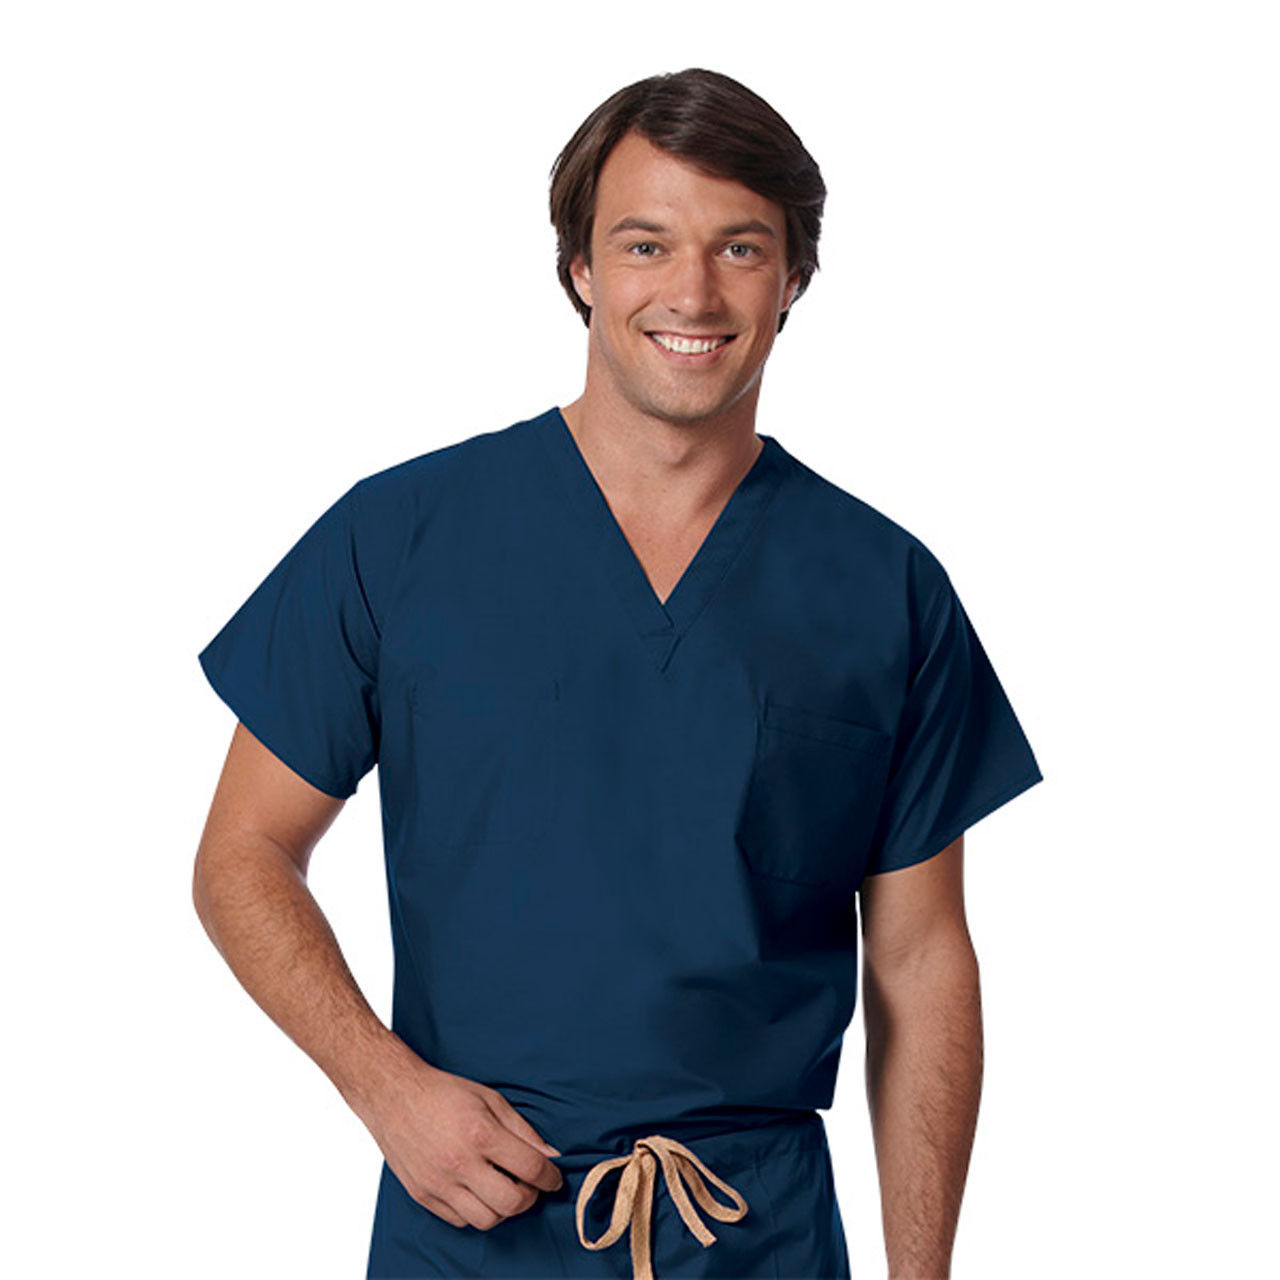 Is the durability of navy surgical scrubs high?